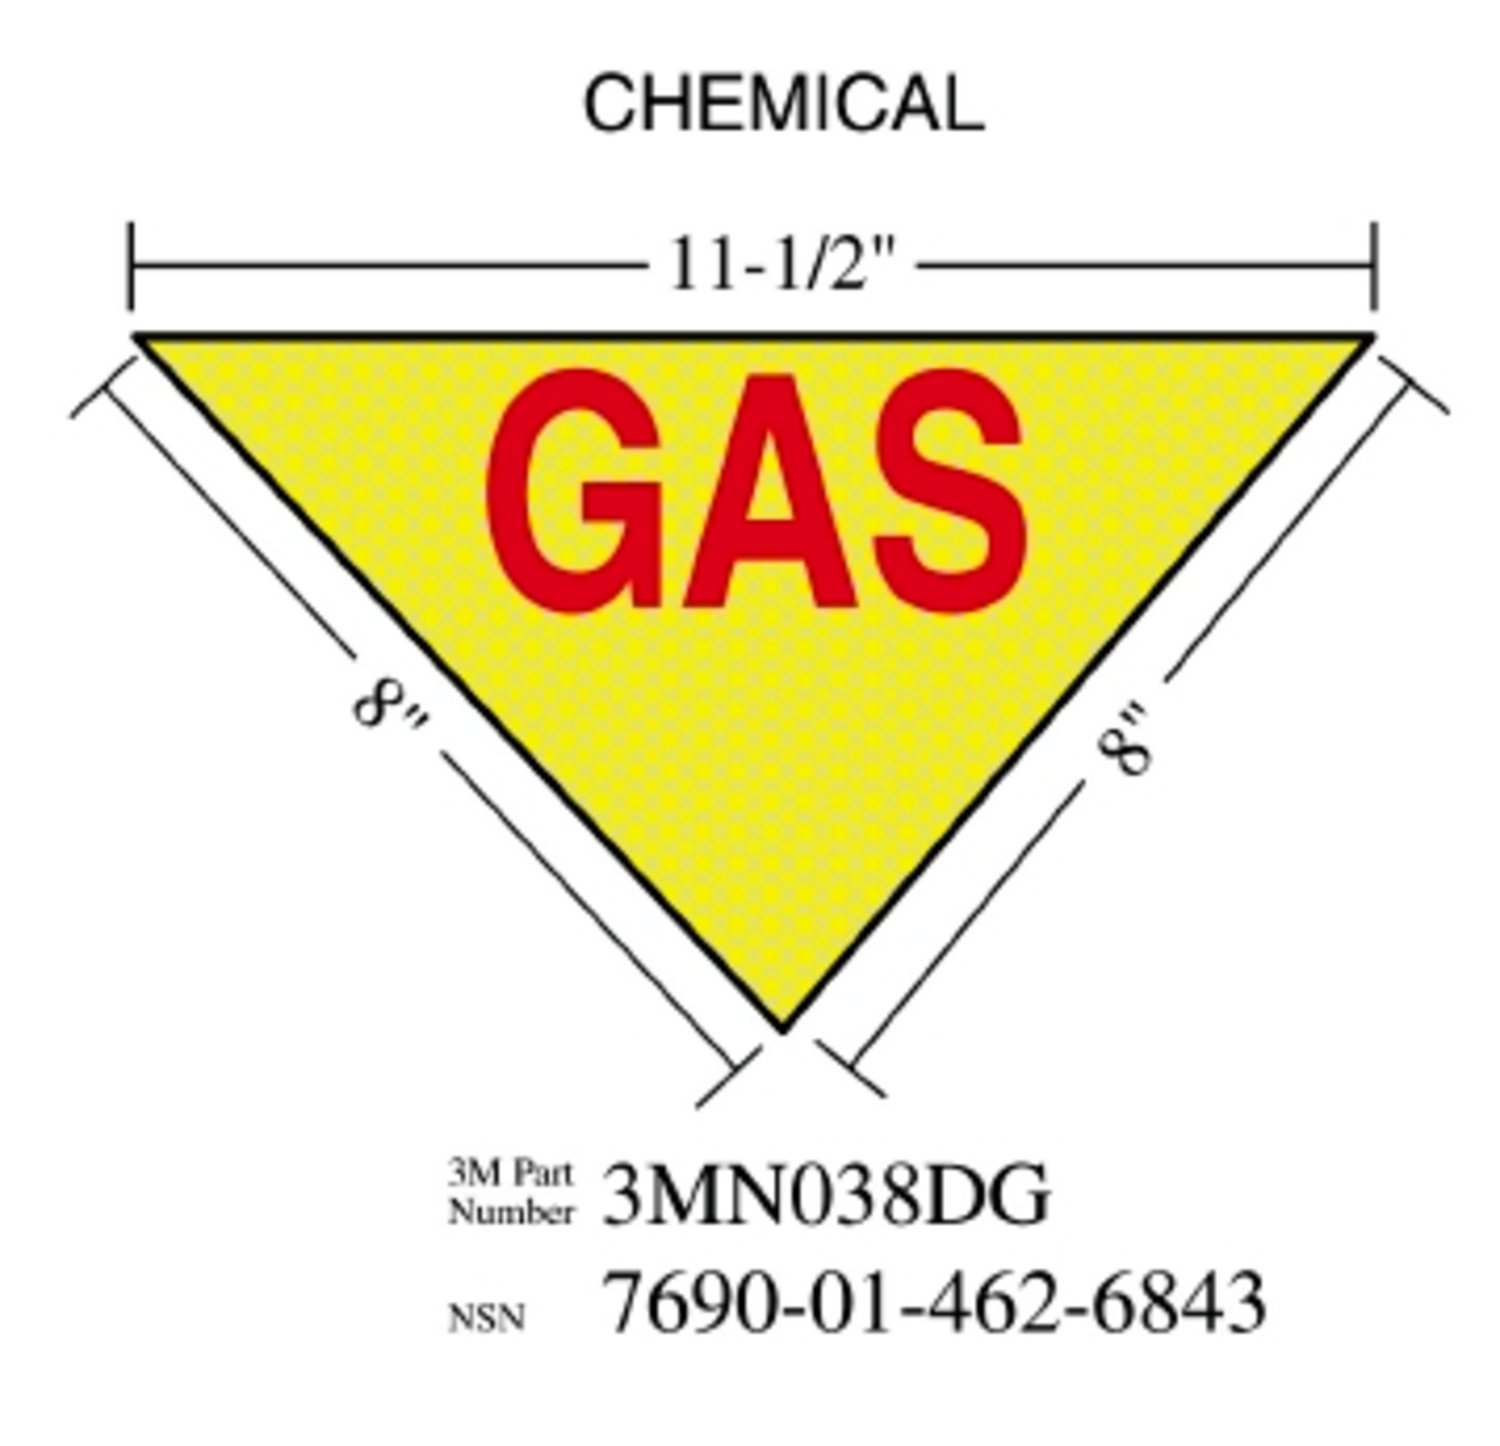 7010302549 - 3M Diamond Grade Damage Control Sign 3MN038DG, "CHEM", 11-1/2 in x 8
in, 10/Package